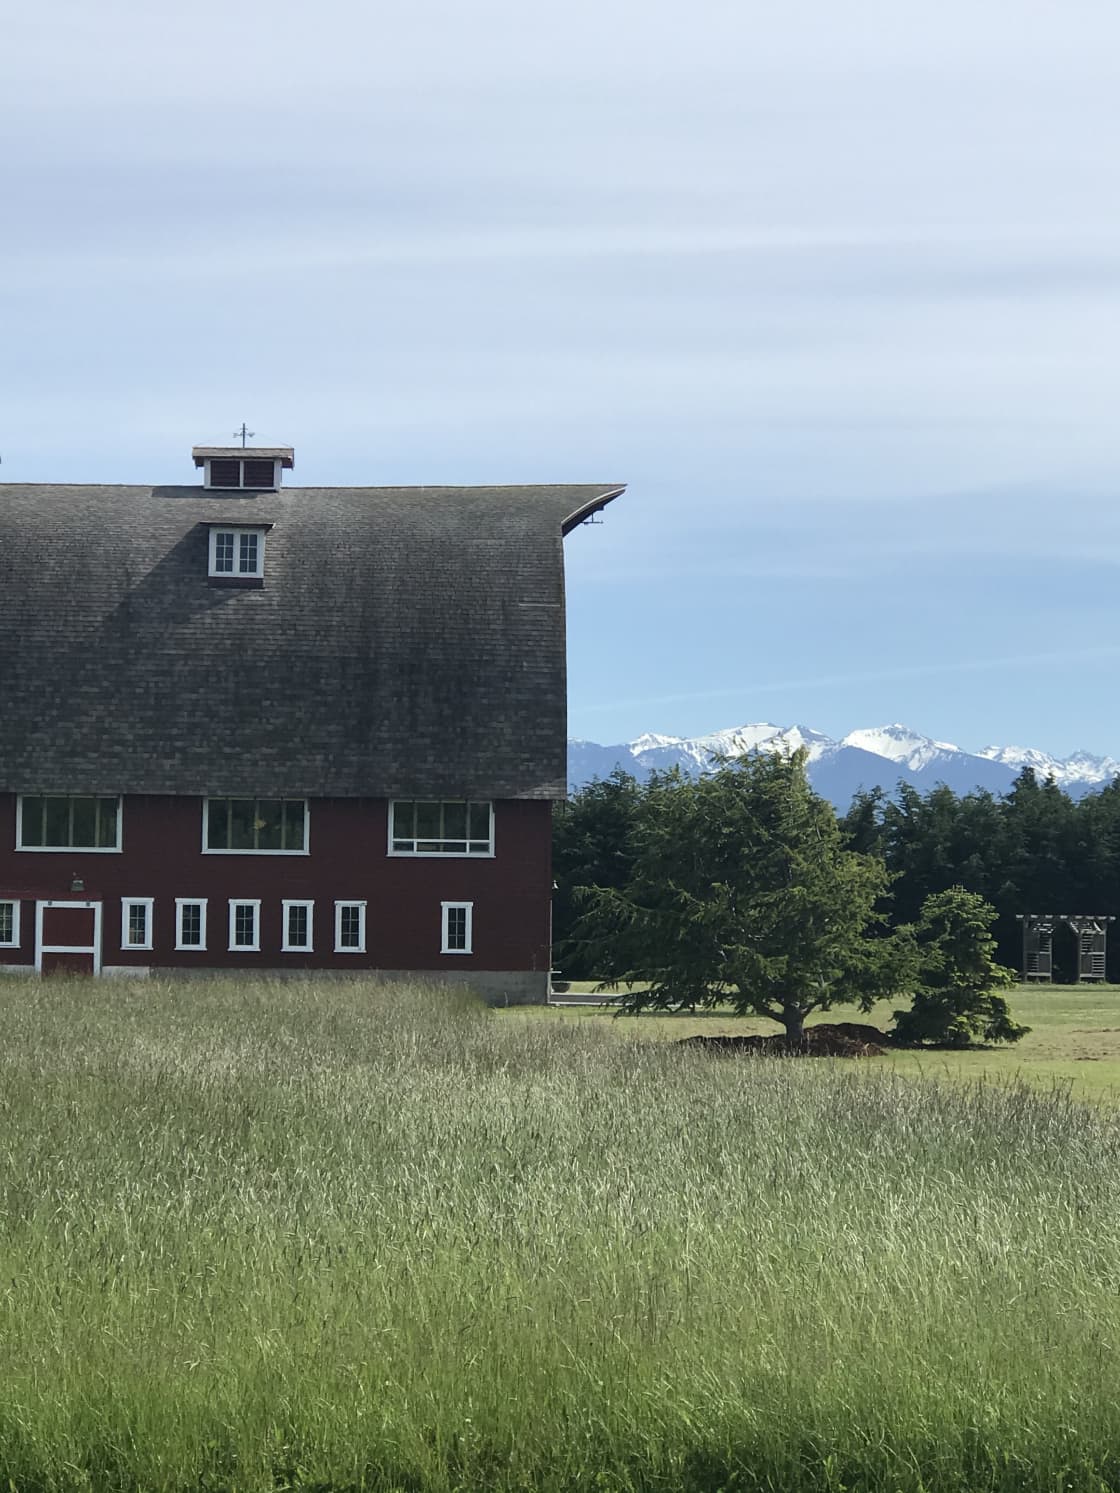 Olympic Mountains and Barn